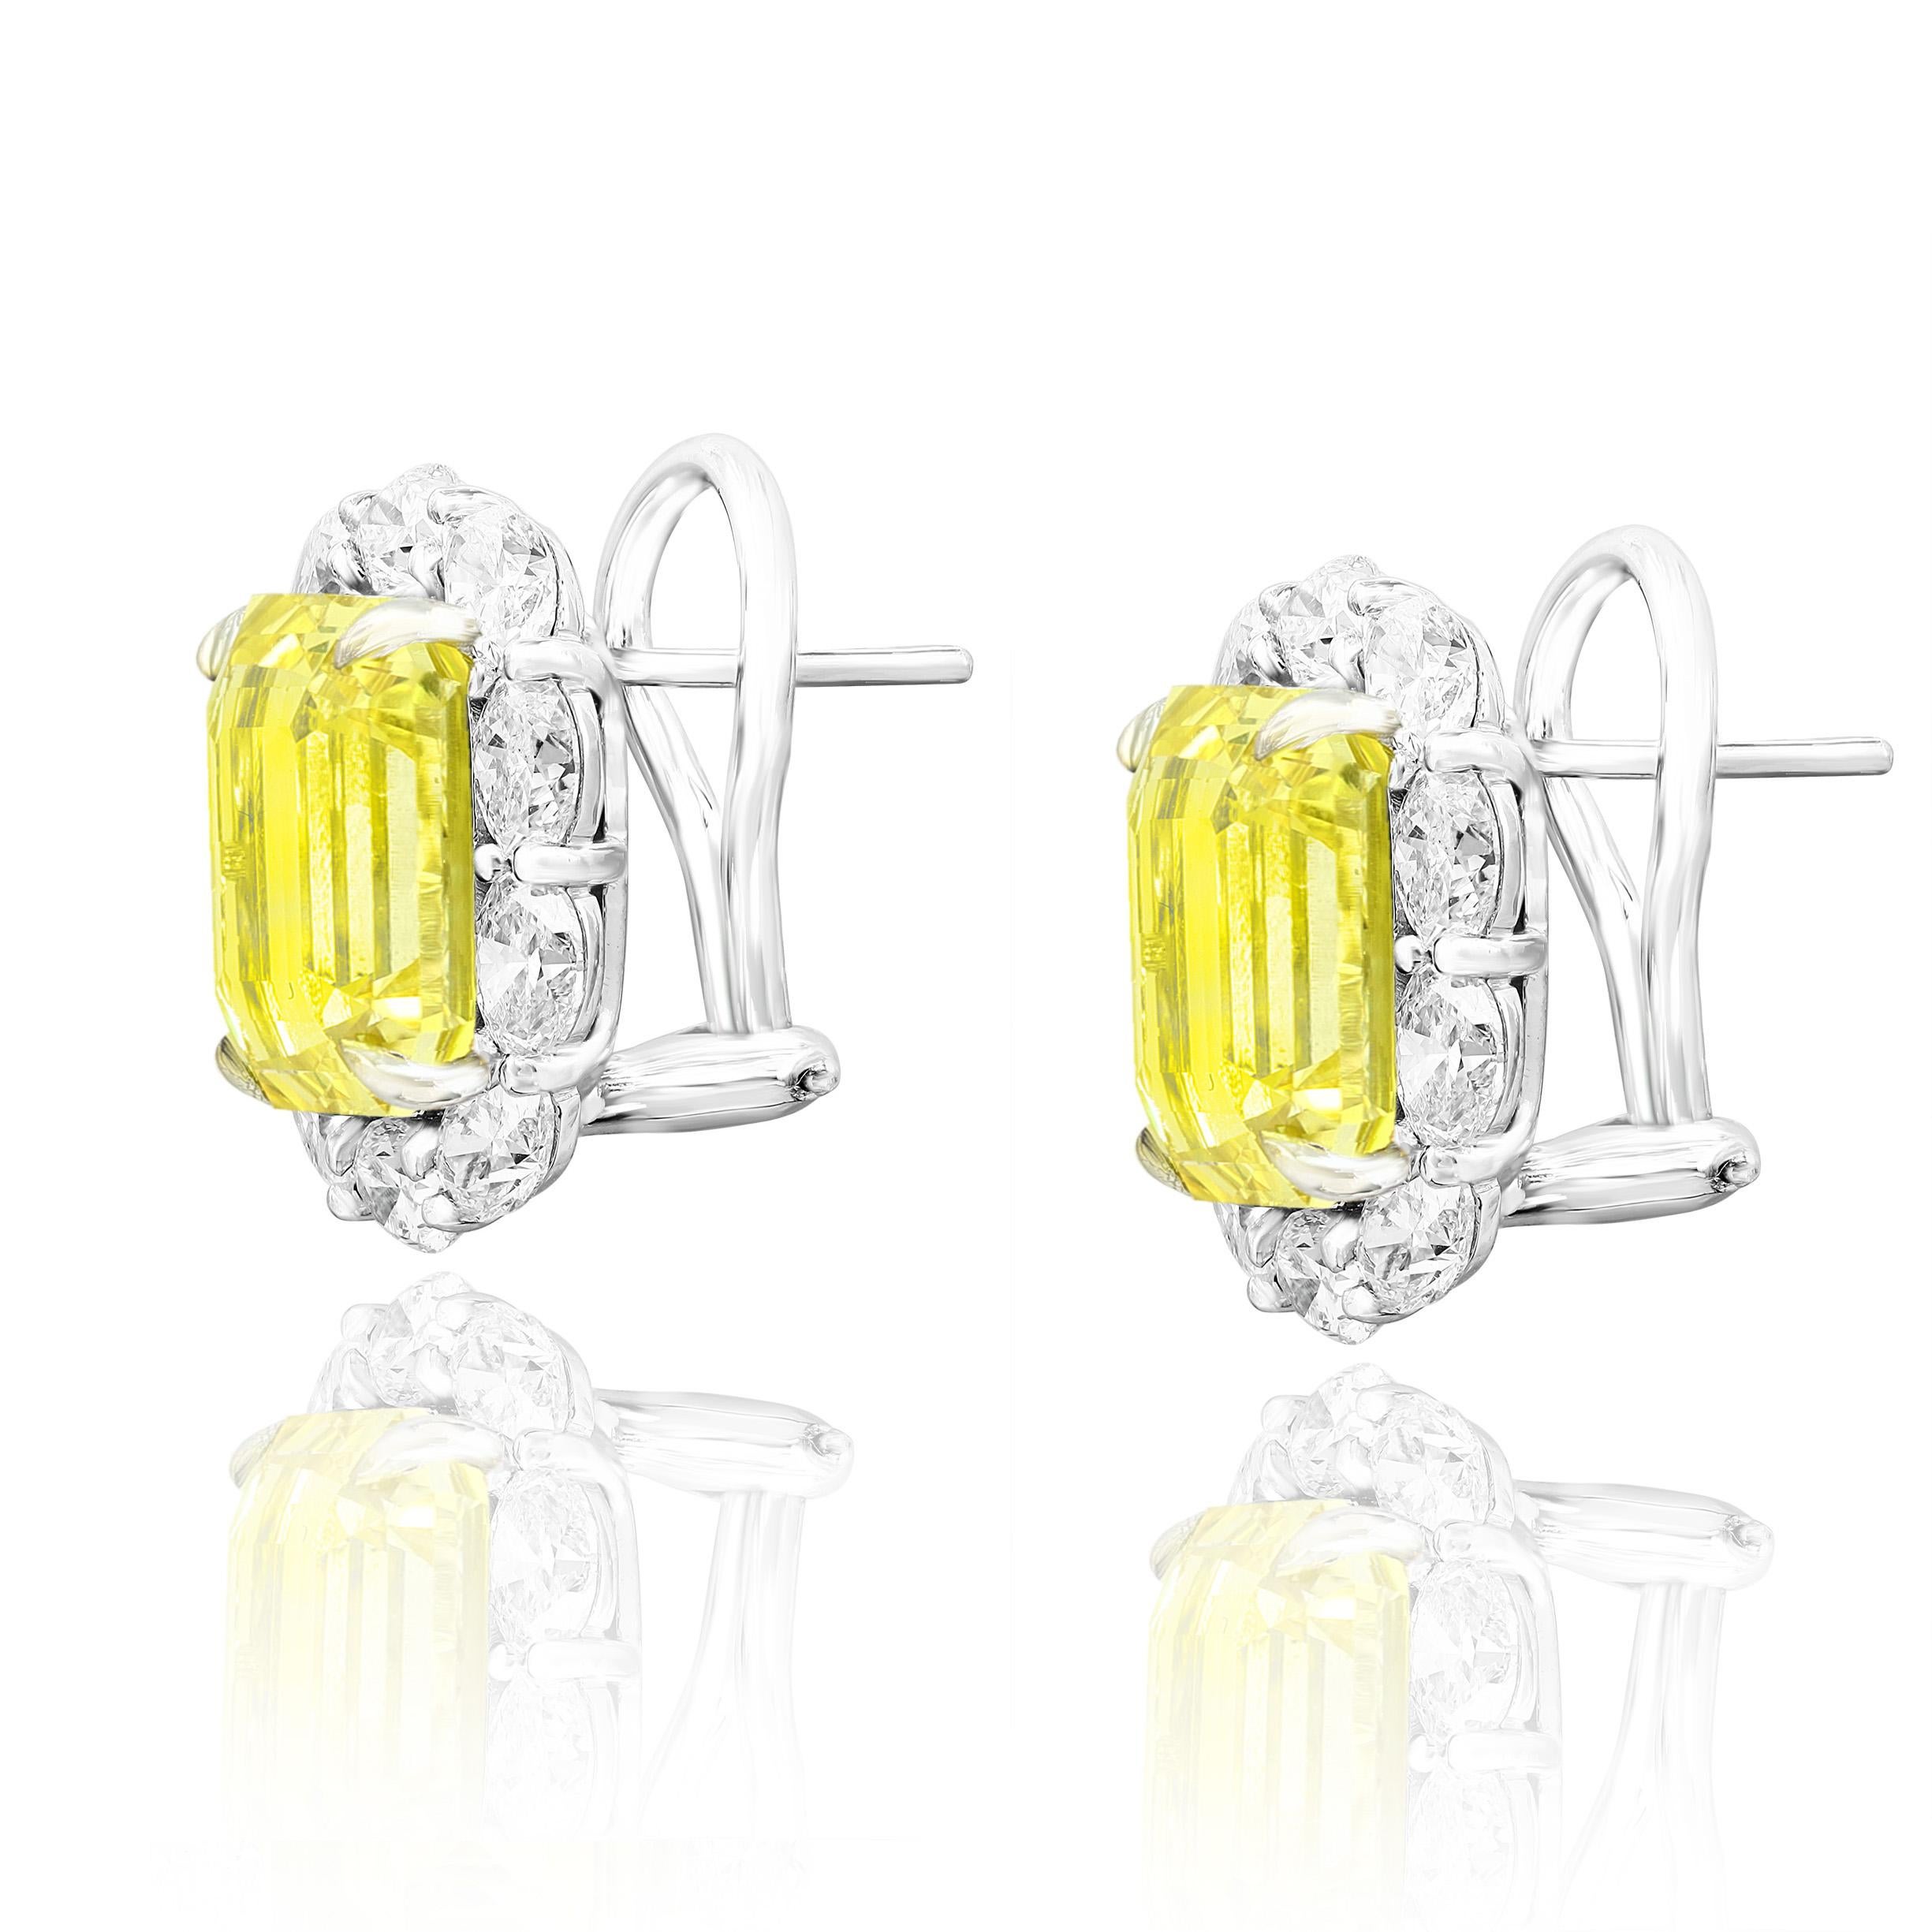 Showcasing two color-rich Emerald cut Yellow Sapphires weighing 10.09 carats total, surrounded by a single row of oval-cut brilliant diamonds. 20 Accent diamonds weigh 3.18 carats in total. Set in 18 karats white gold. Omega Clip with the